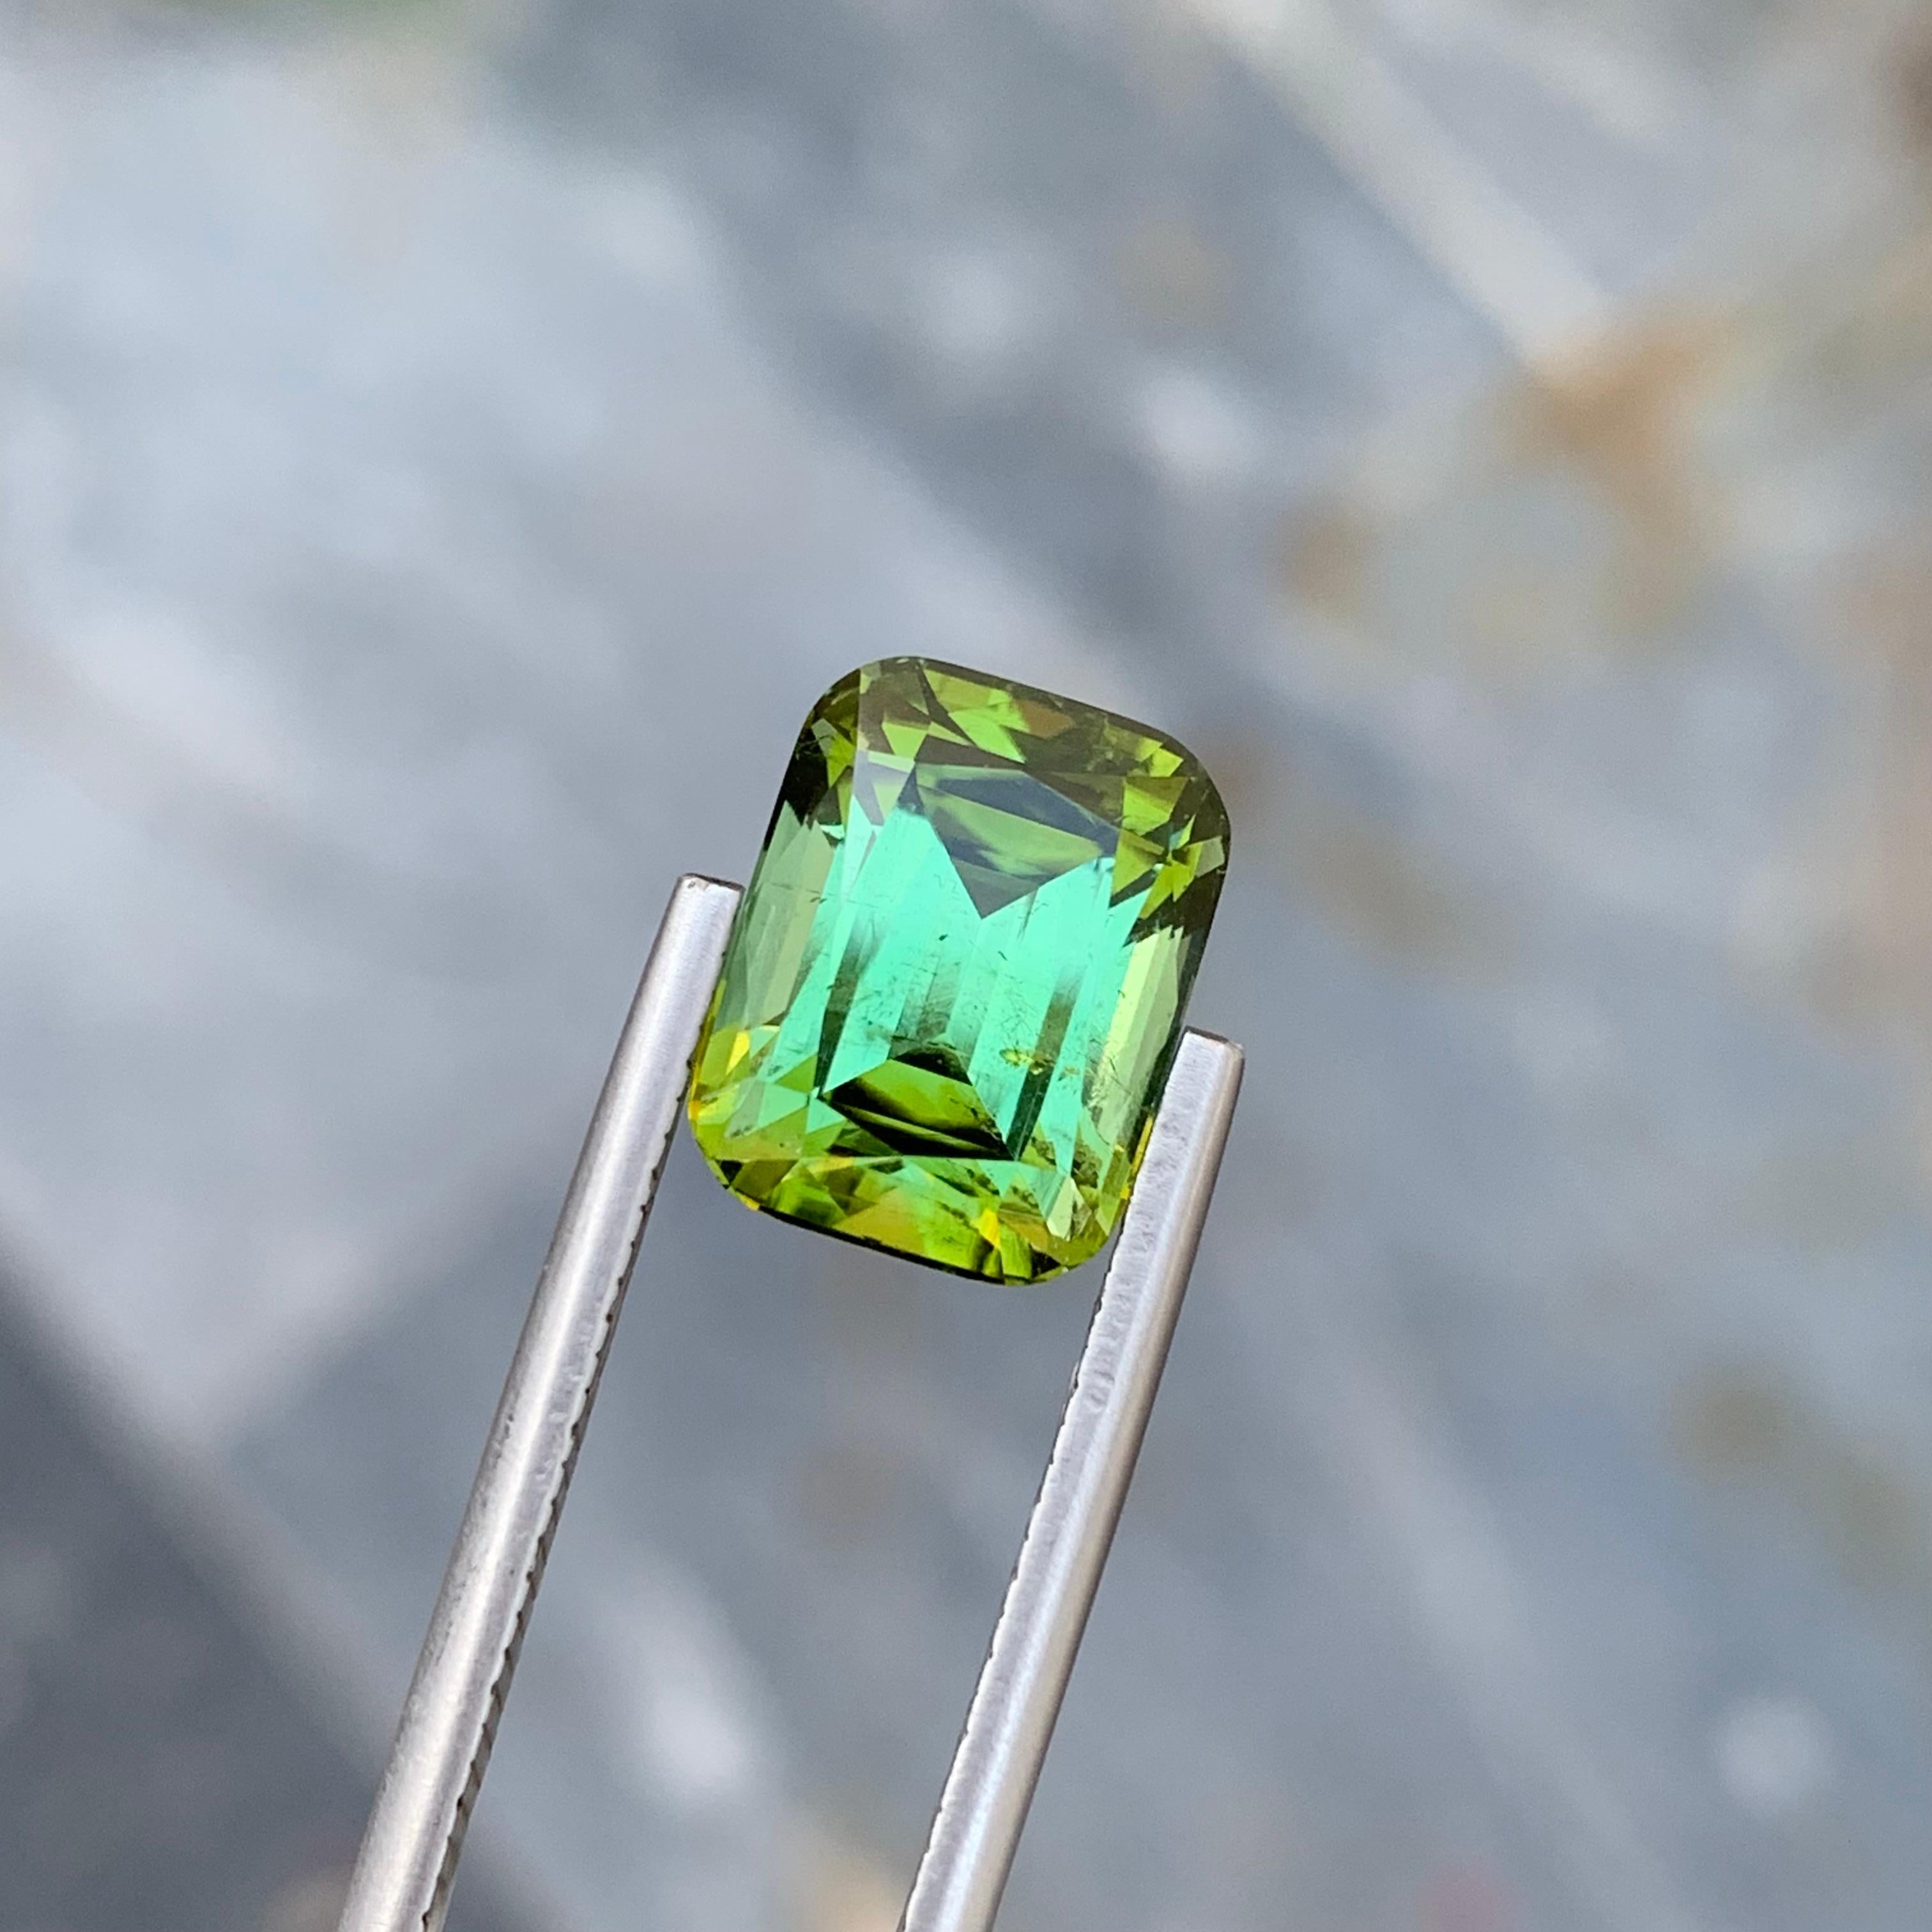 6.15 Carat Natural Loose Green Tourmaline With Lagoon Shade Emerald Shape Gem For Sale 4